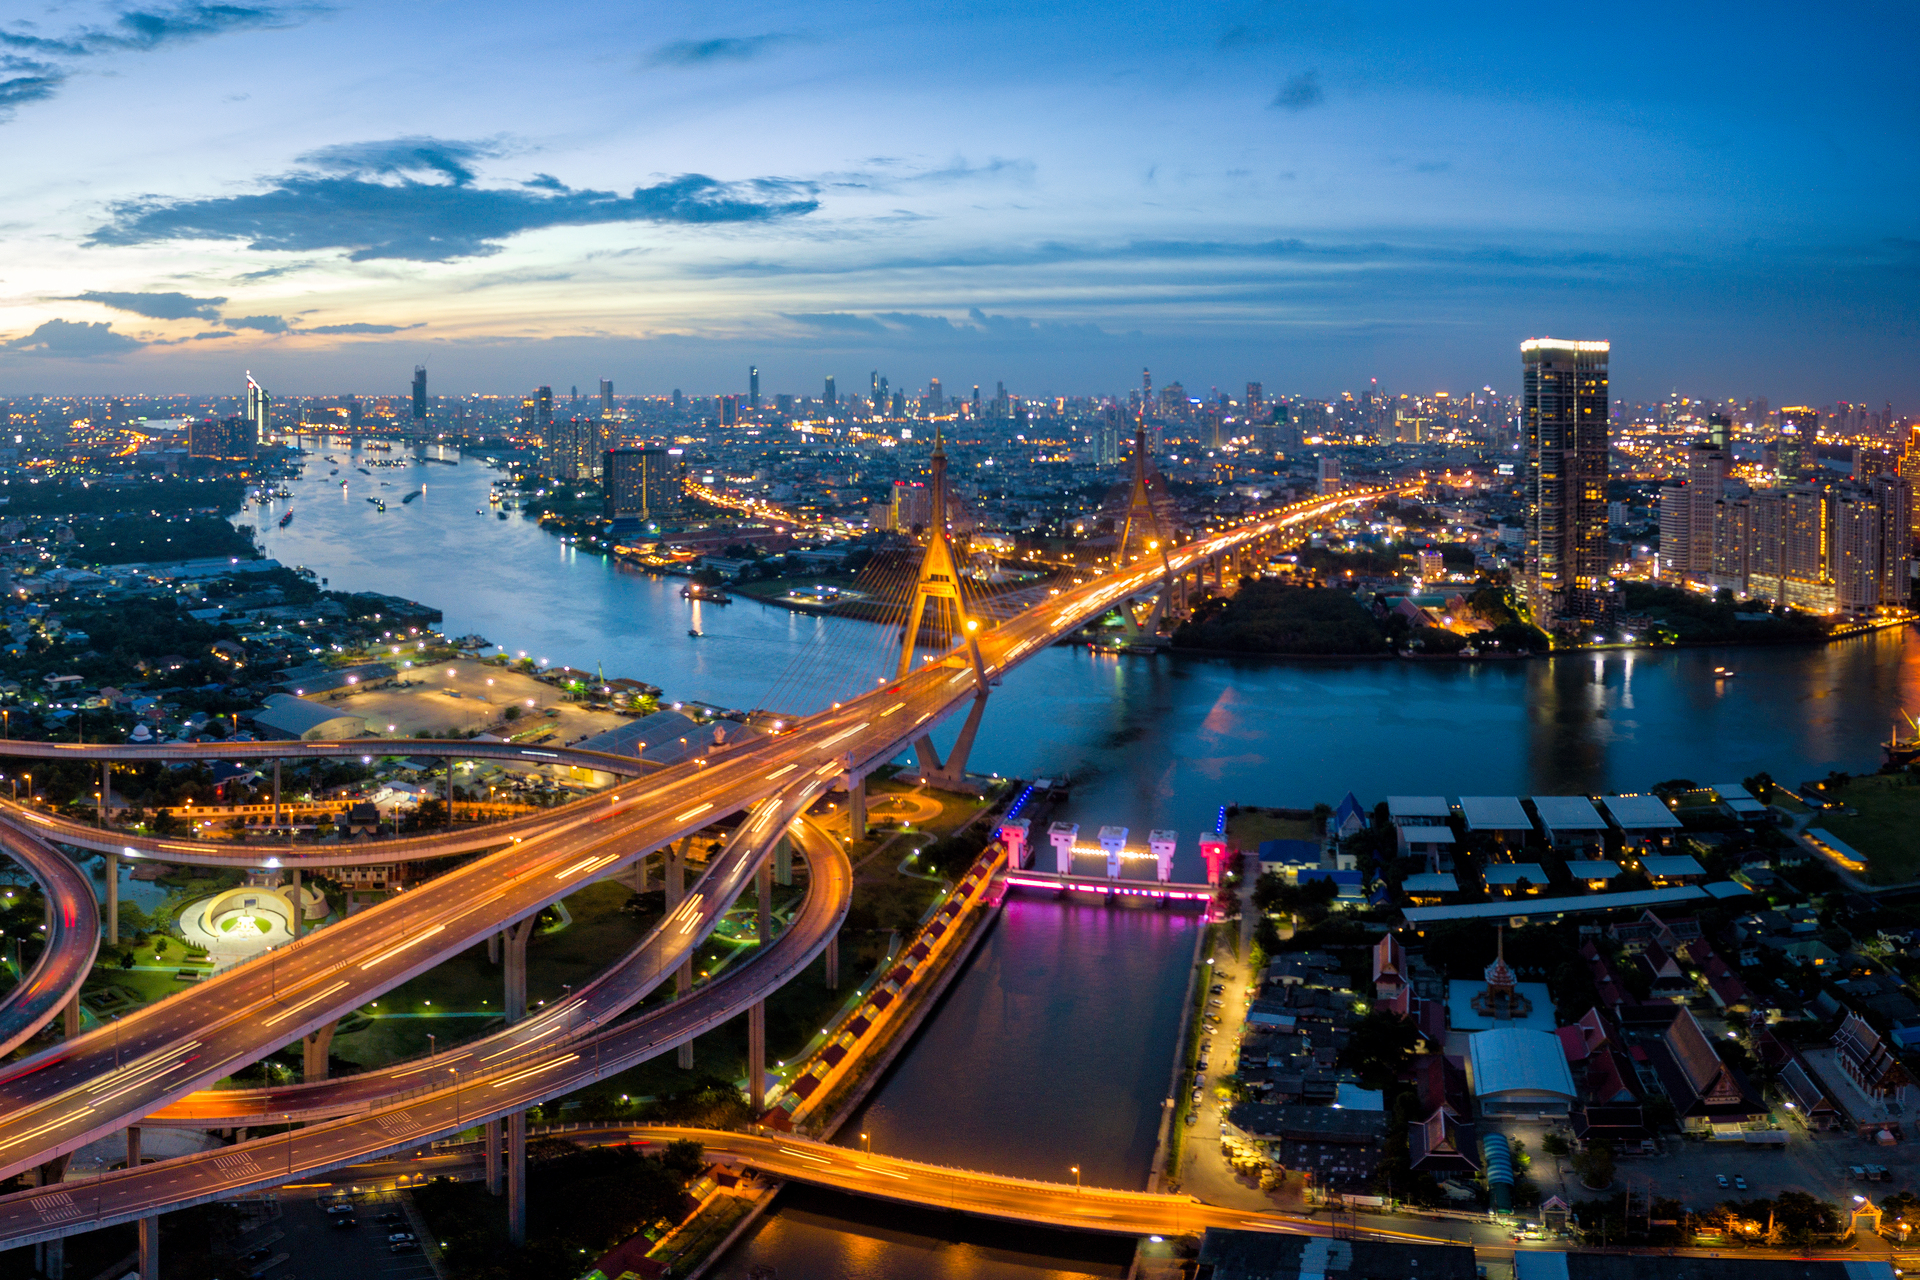 Aerial view of Bhumibol suspension bridge cross over Chao Phraya River in Bangkok city with car on the bridge at sunset sky and clouds in Bangkok Thailand.